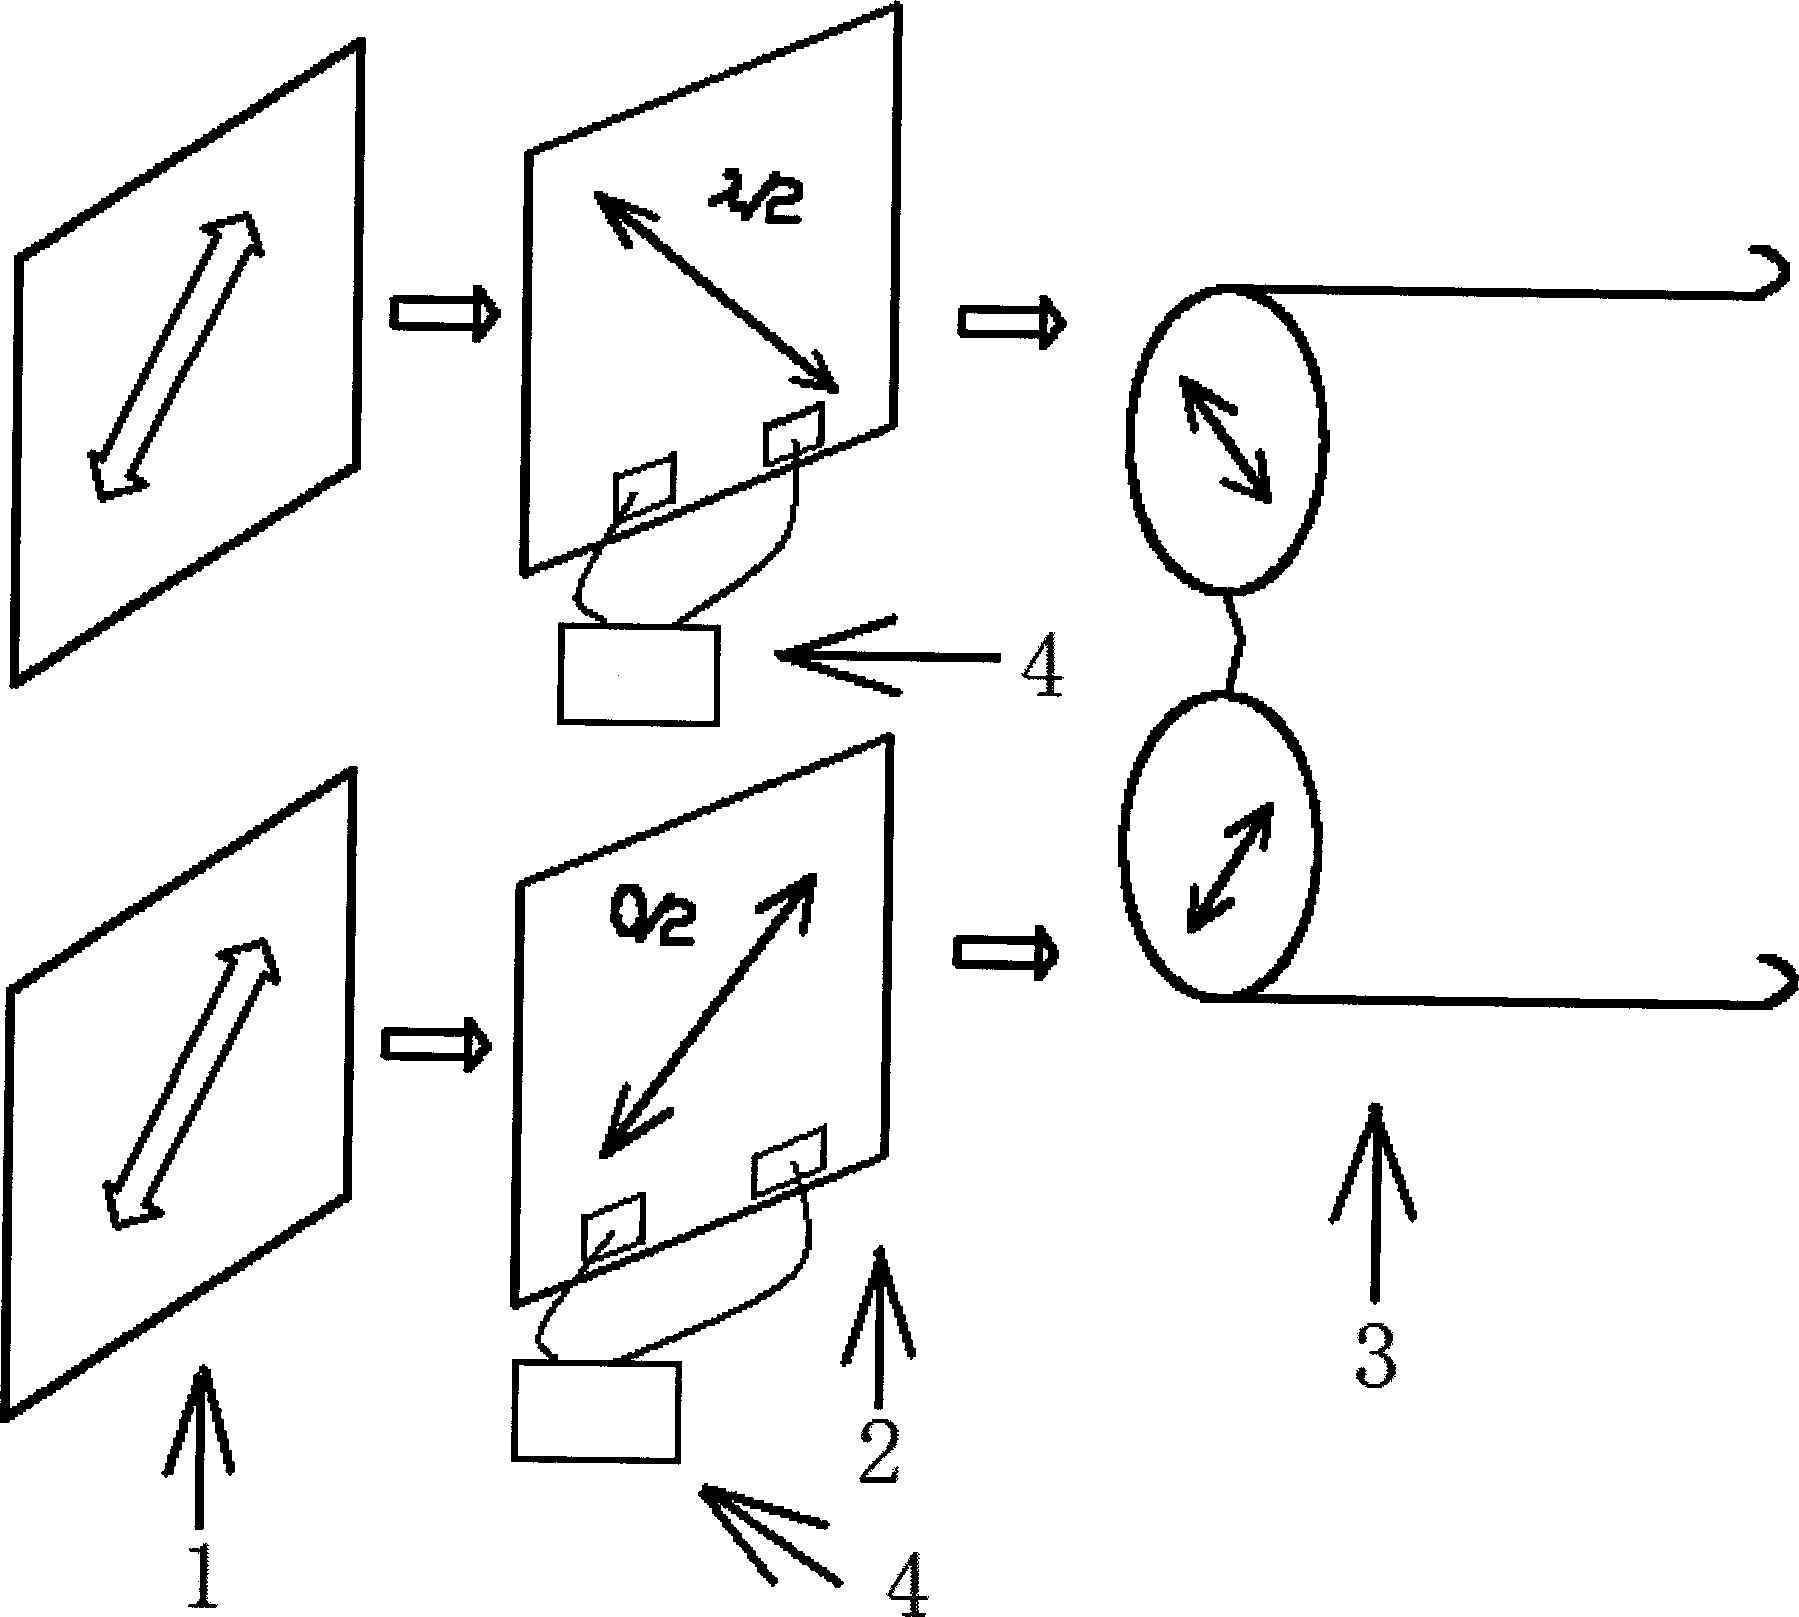 Implementation mode of full-resolution stereo display system